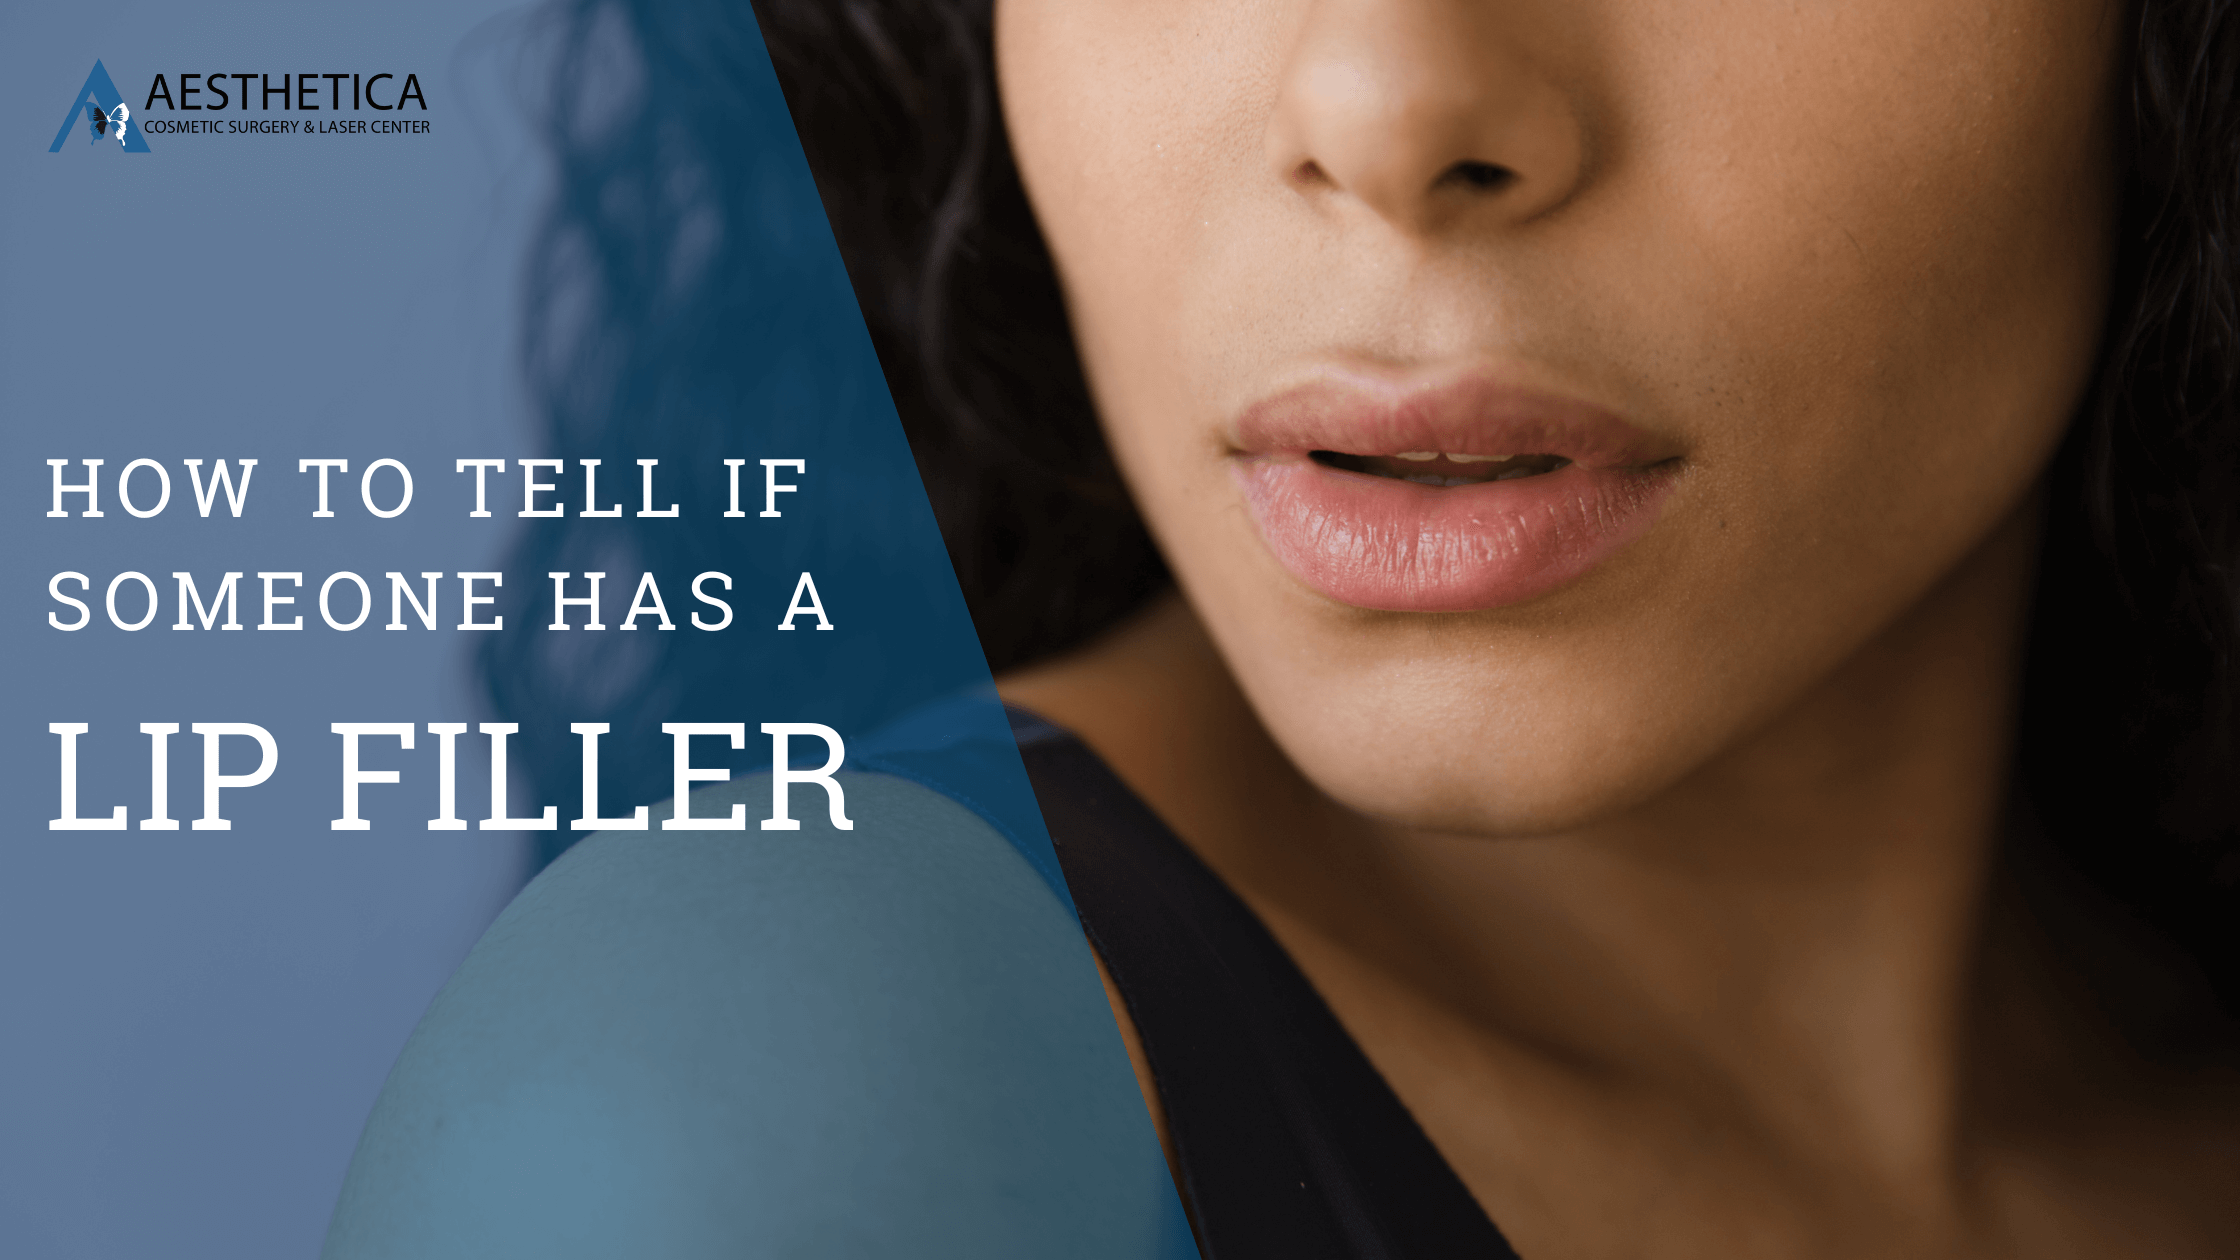 How to Tell if Someone Has Lip Filler